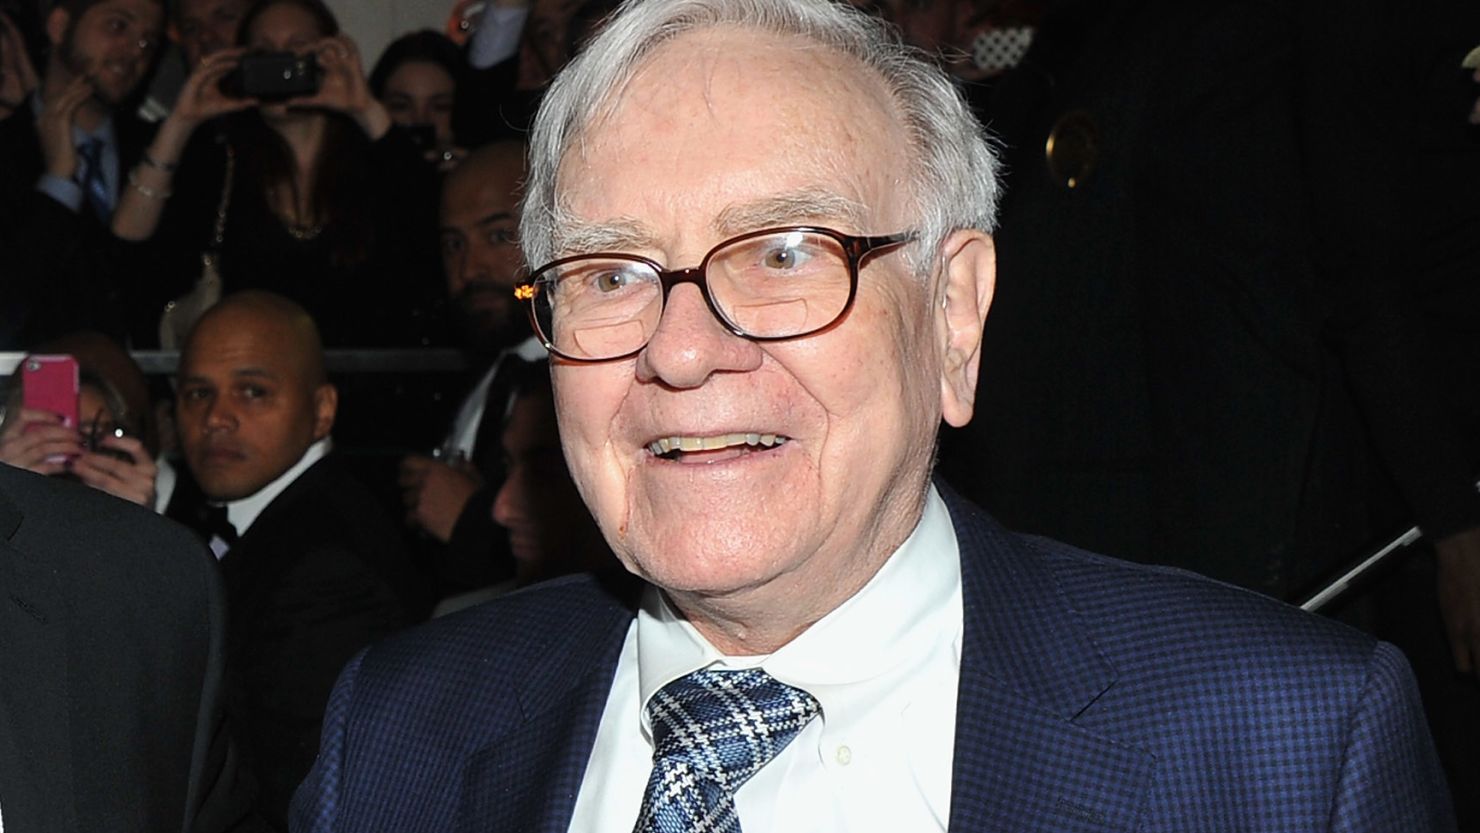 The rule takes its name from investor Warren Buffett, who has called for high taxes on himself and other rich Americans.